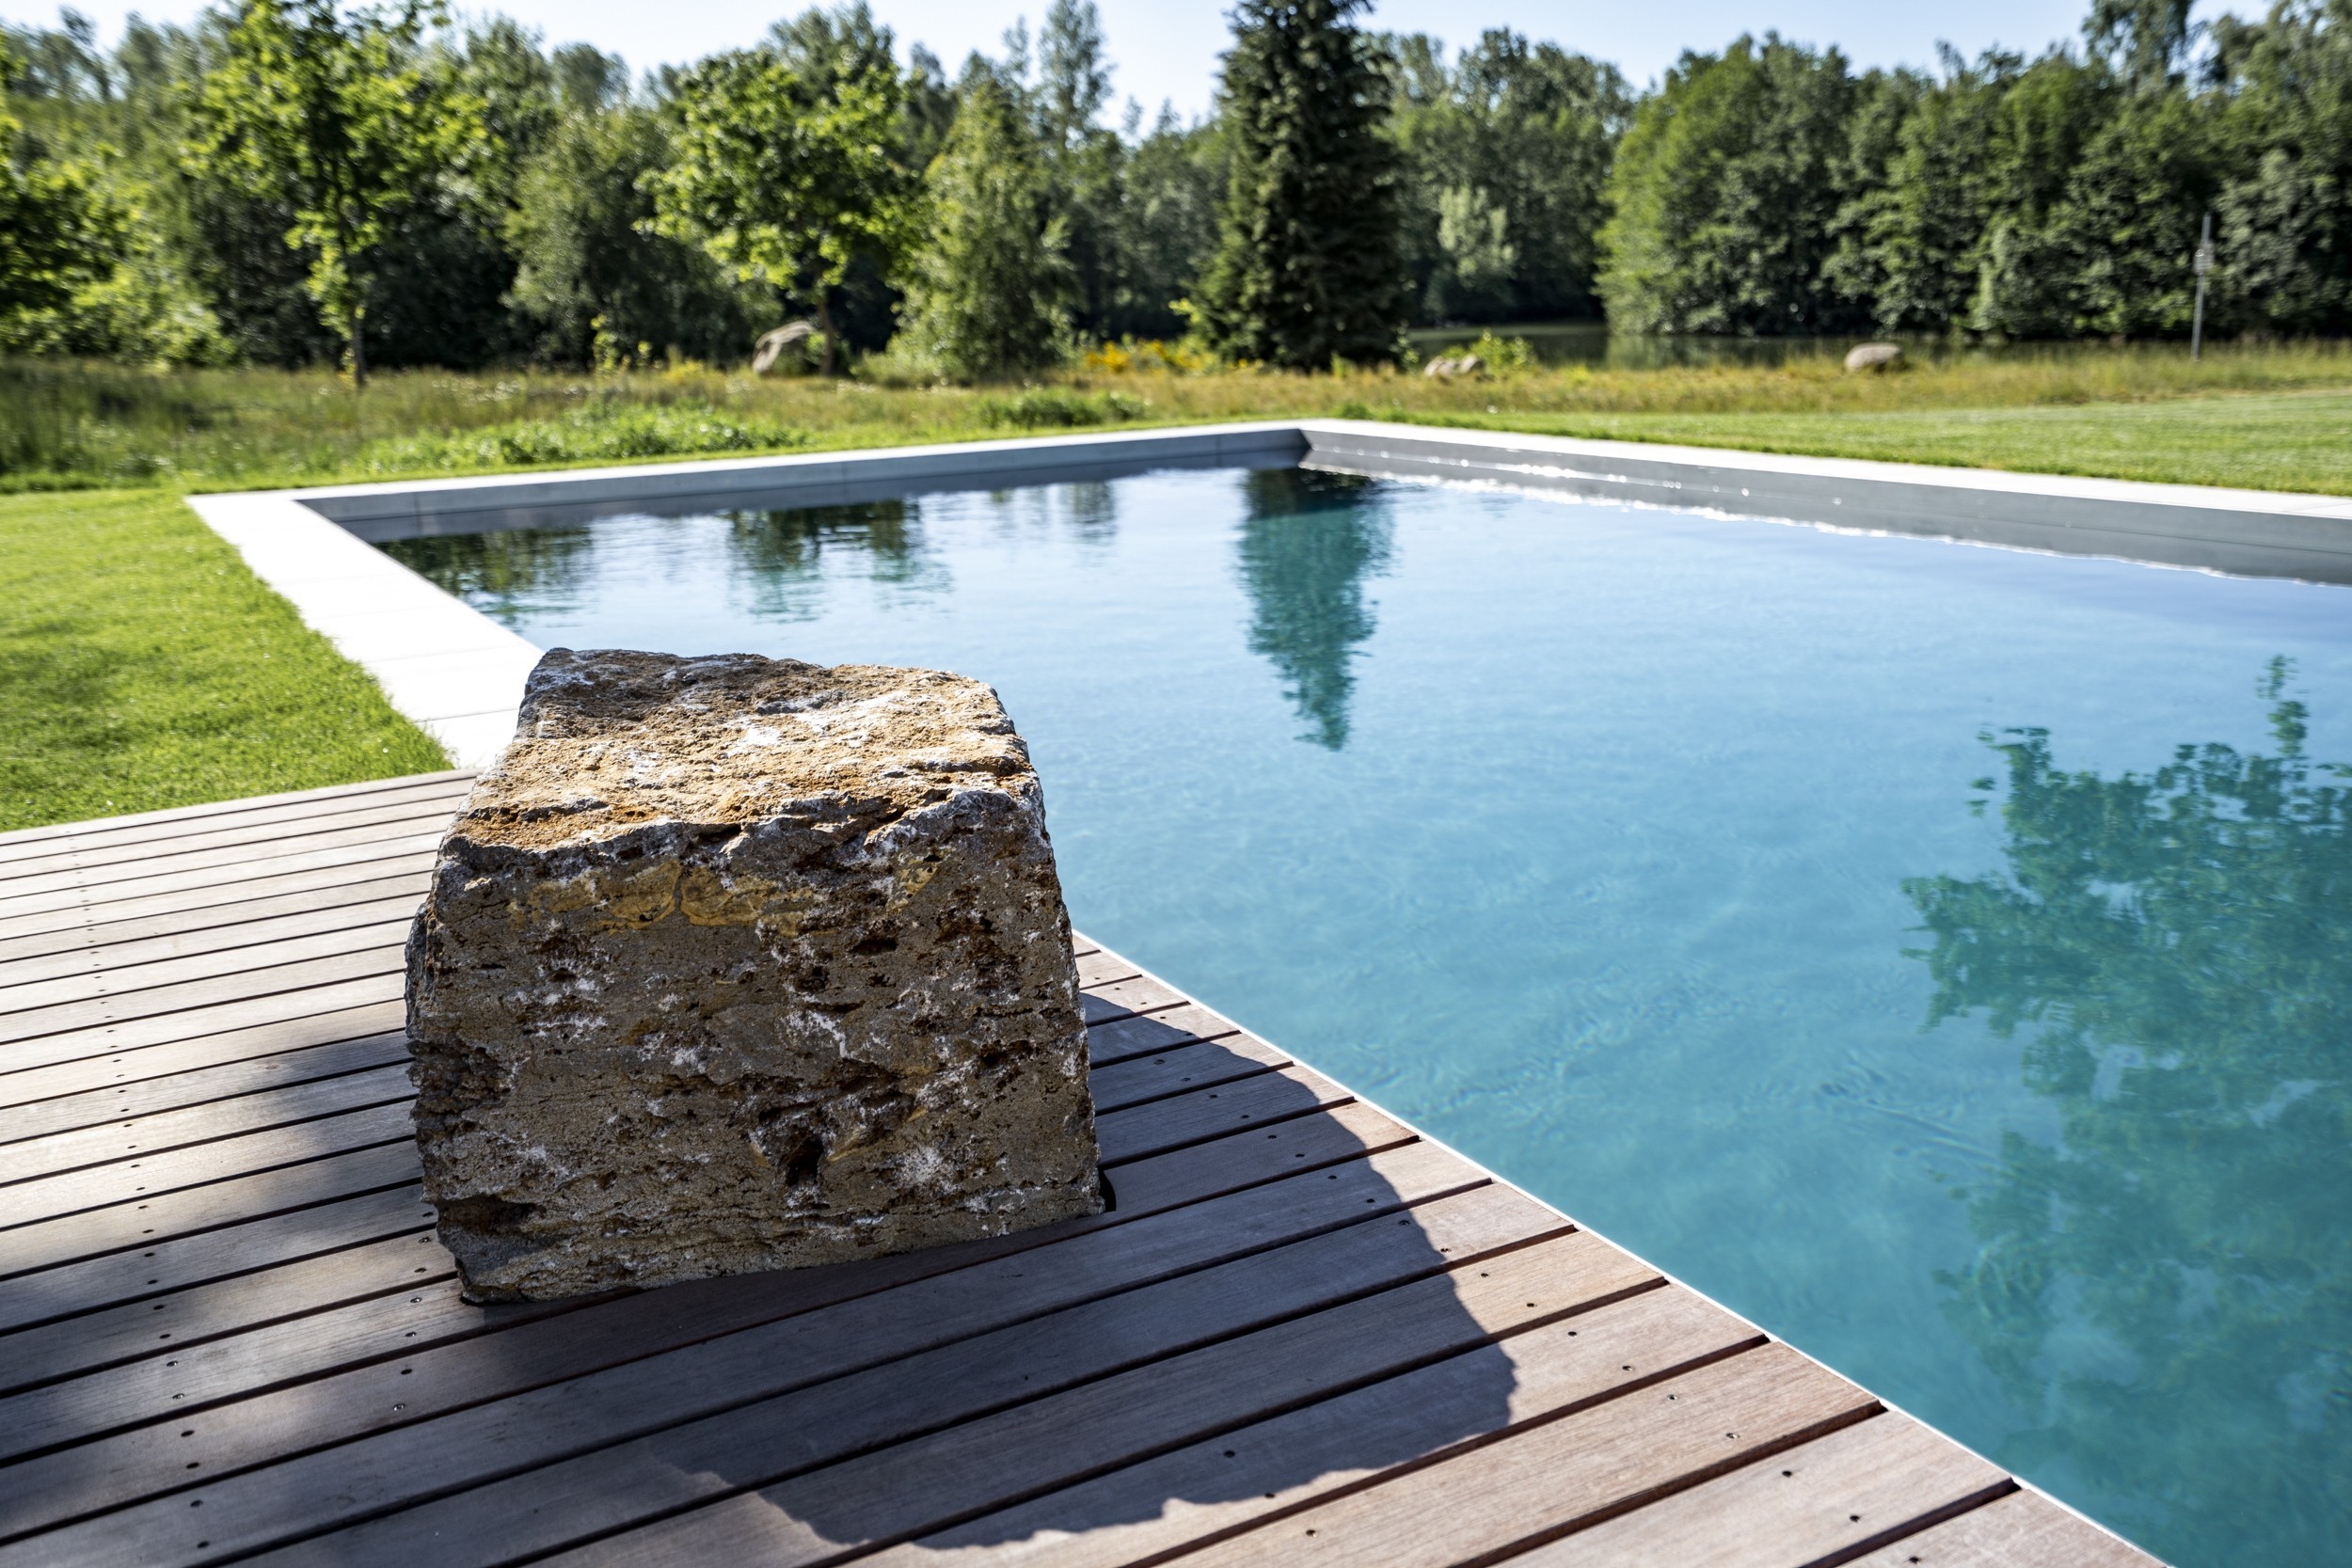 Save water with the Biotop nature pool enjoy all year round